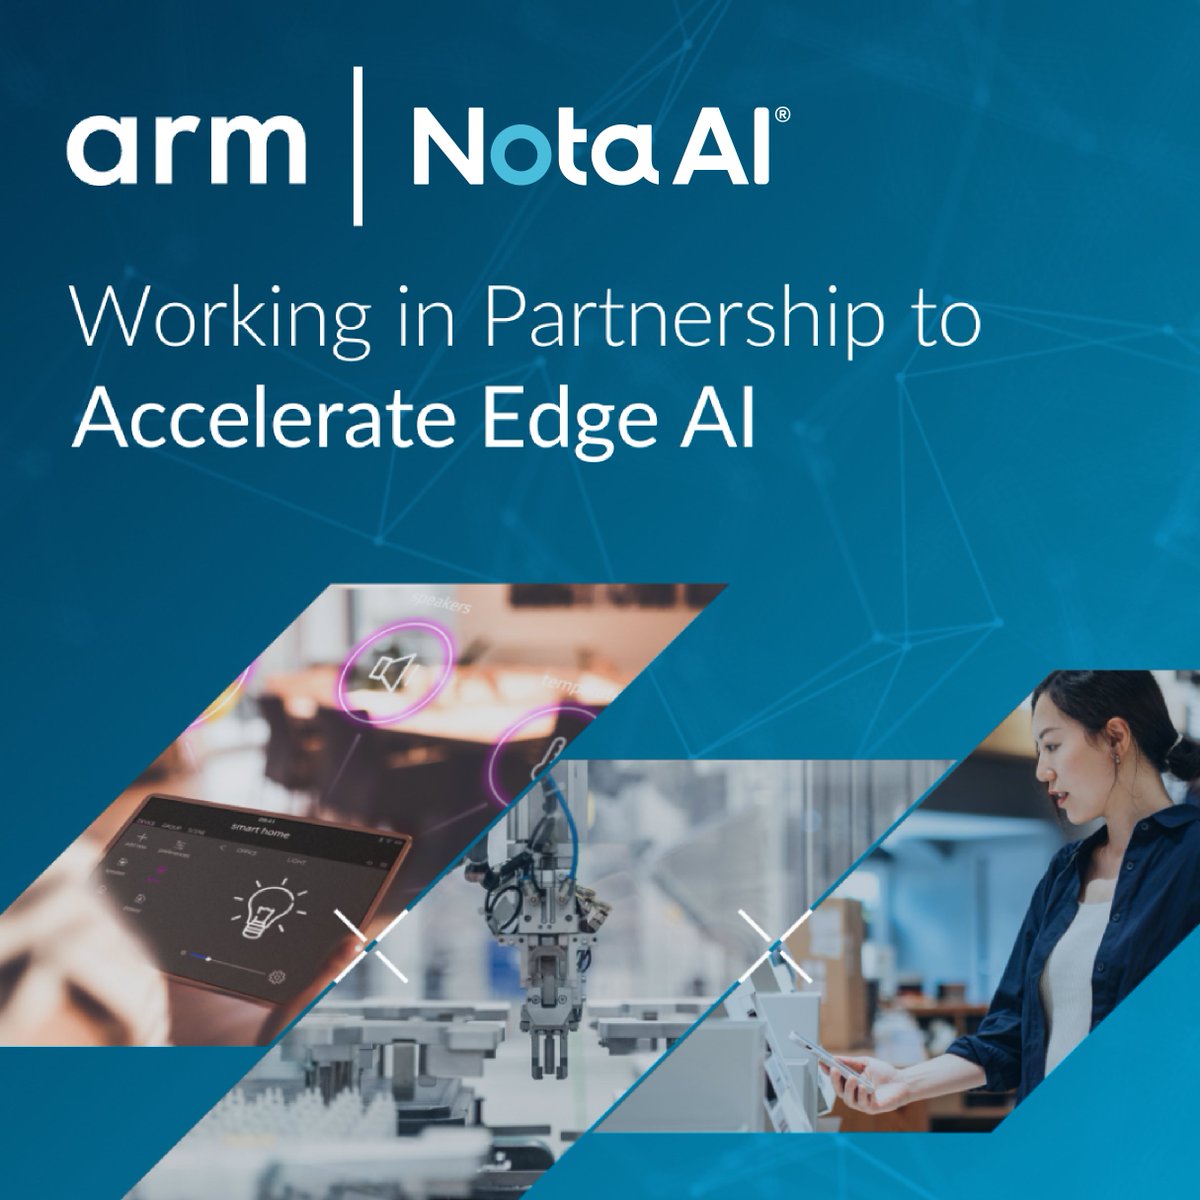 We're pleased to see #Arm's commitment to the future of edge AI with new technologies that provide the performance and efficiency uplift needed to drive transformative applications in the IoT: bit.ly/3VGGnAF #edgeai#IoT#armpartner